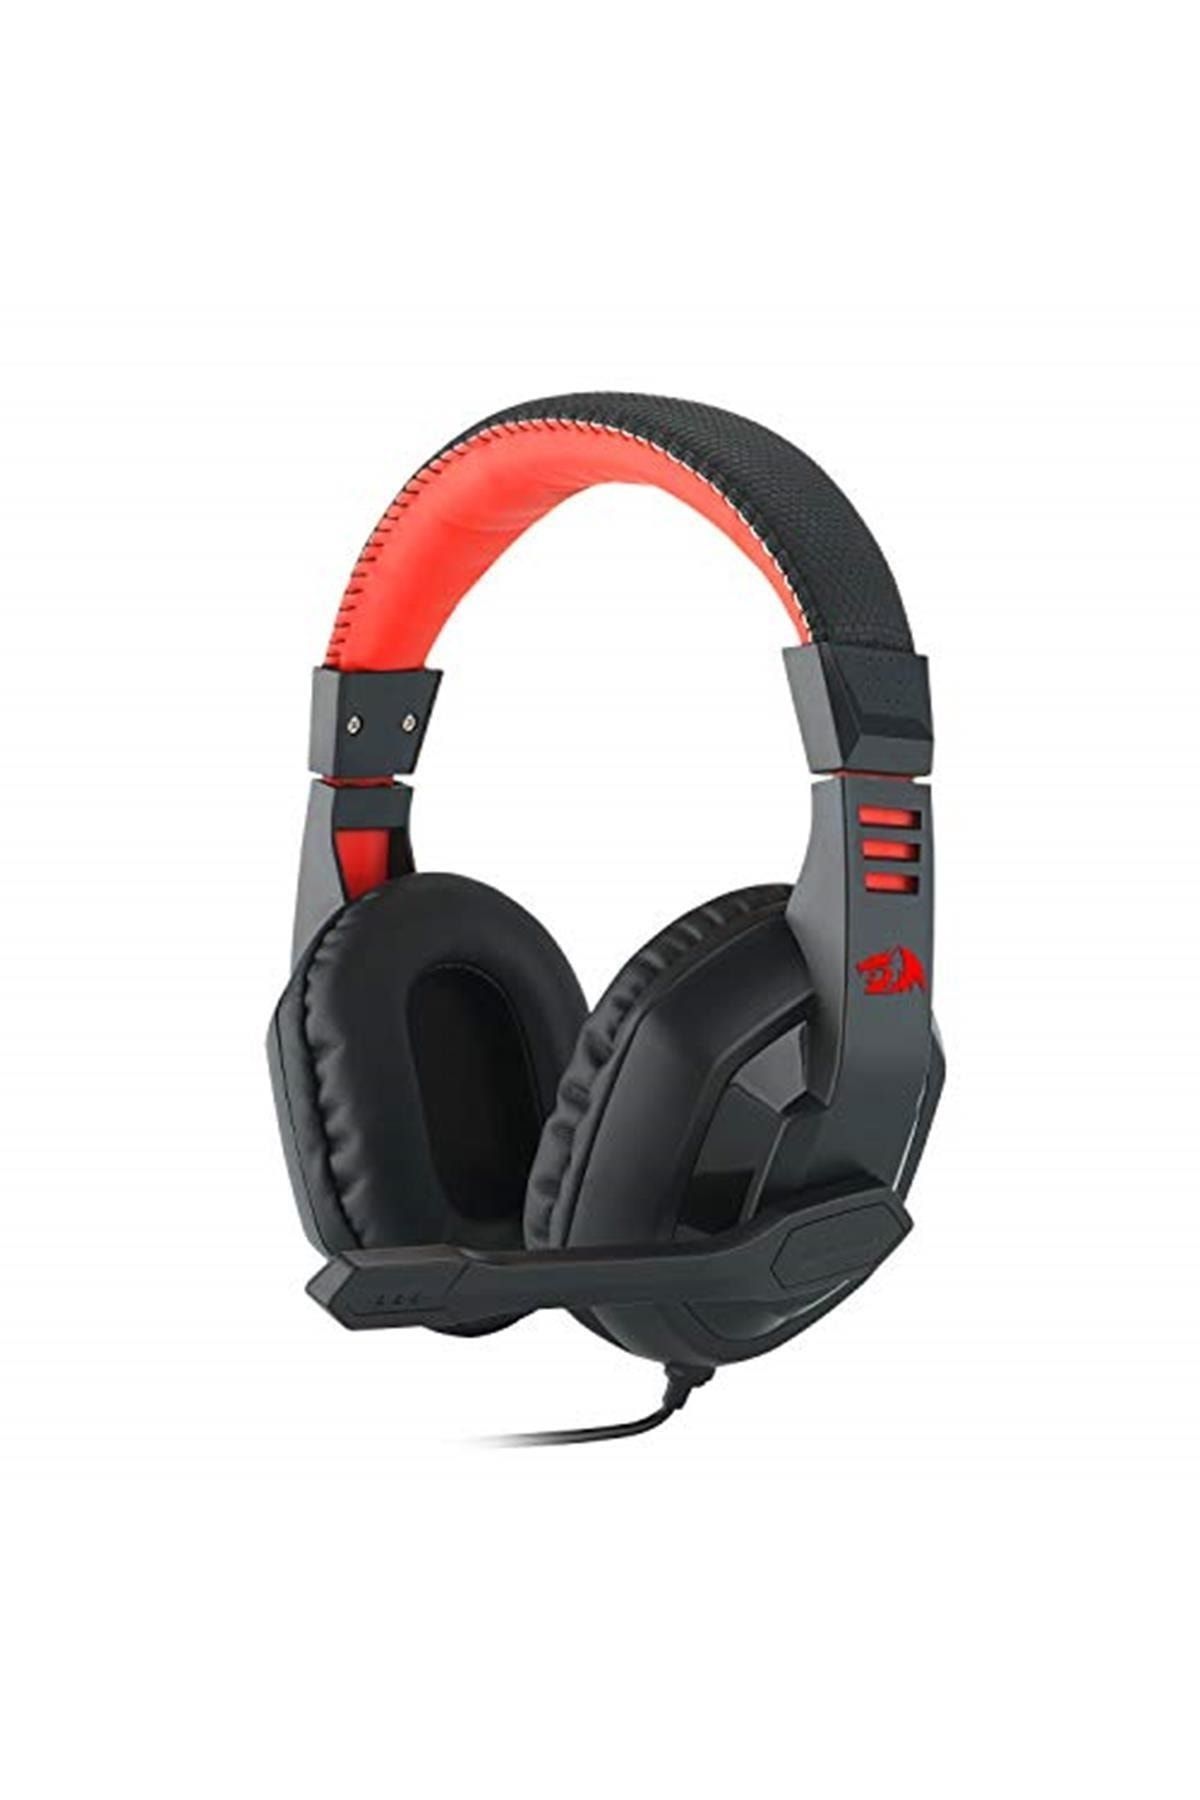 REDRAGON H120 Ares Headset